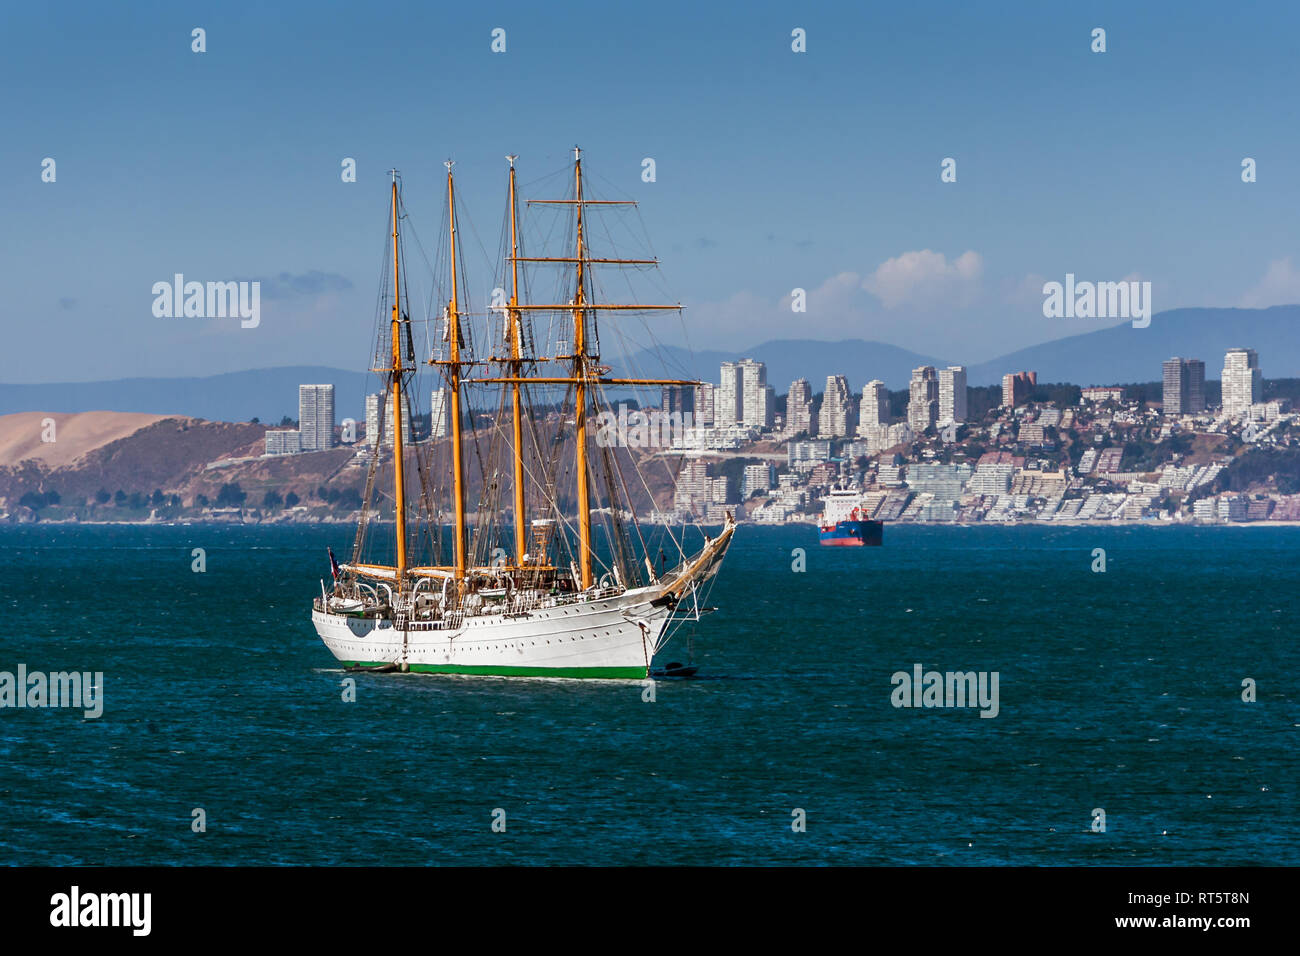 Valparaiso, Chile, November 23, 2017: Esmeralda, a steel-hulled four-masted barquentine tall ship of the Chilean Navy. Stock Photo